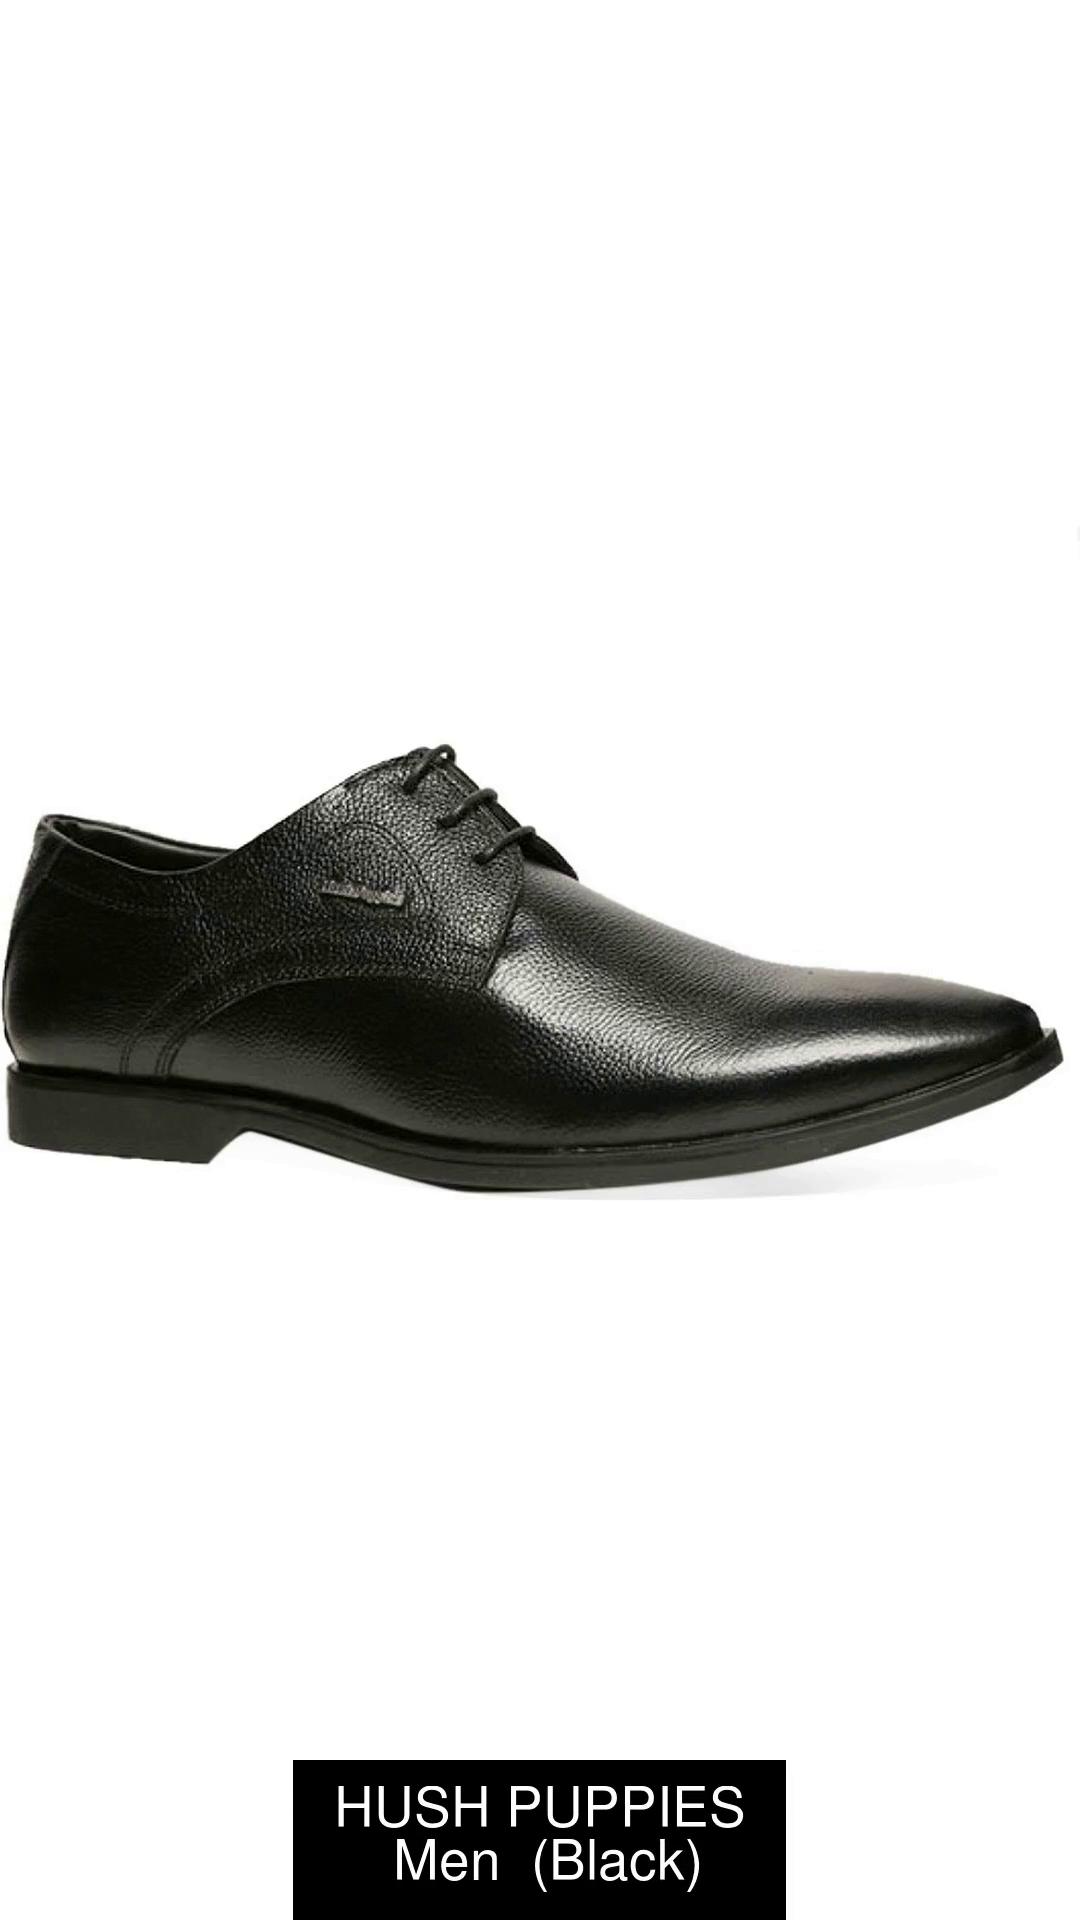 HUSH PUPPIES By Bata Lace Up For Men - Buy Black Color HUSH PUPPIES By Bata Lace Up For Men Online Best Price - Shop Online for Footwears in India | Flipkart.com